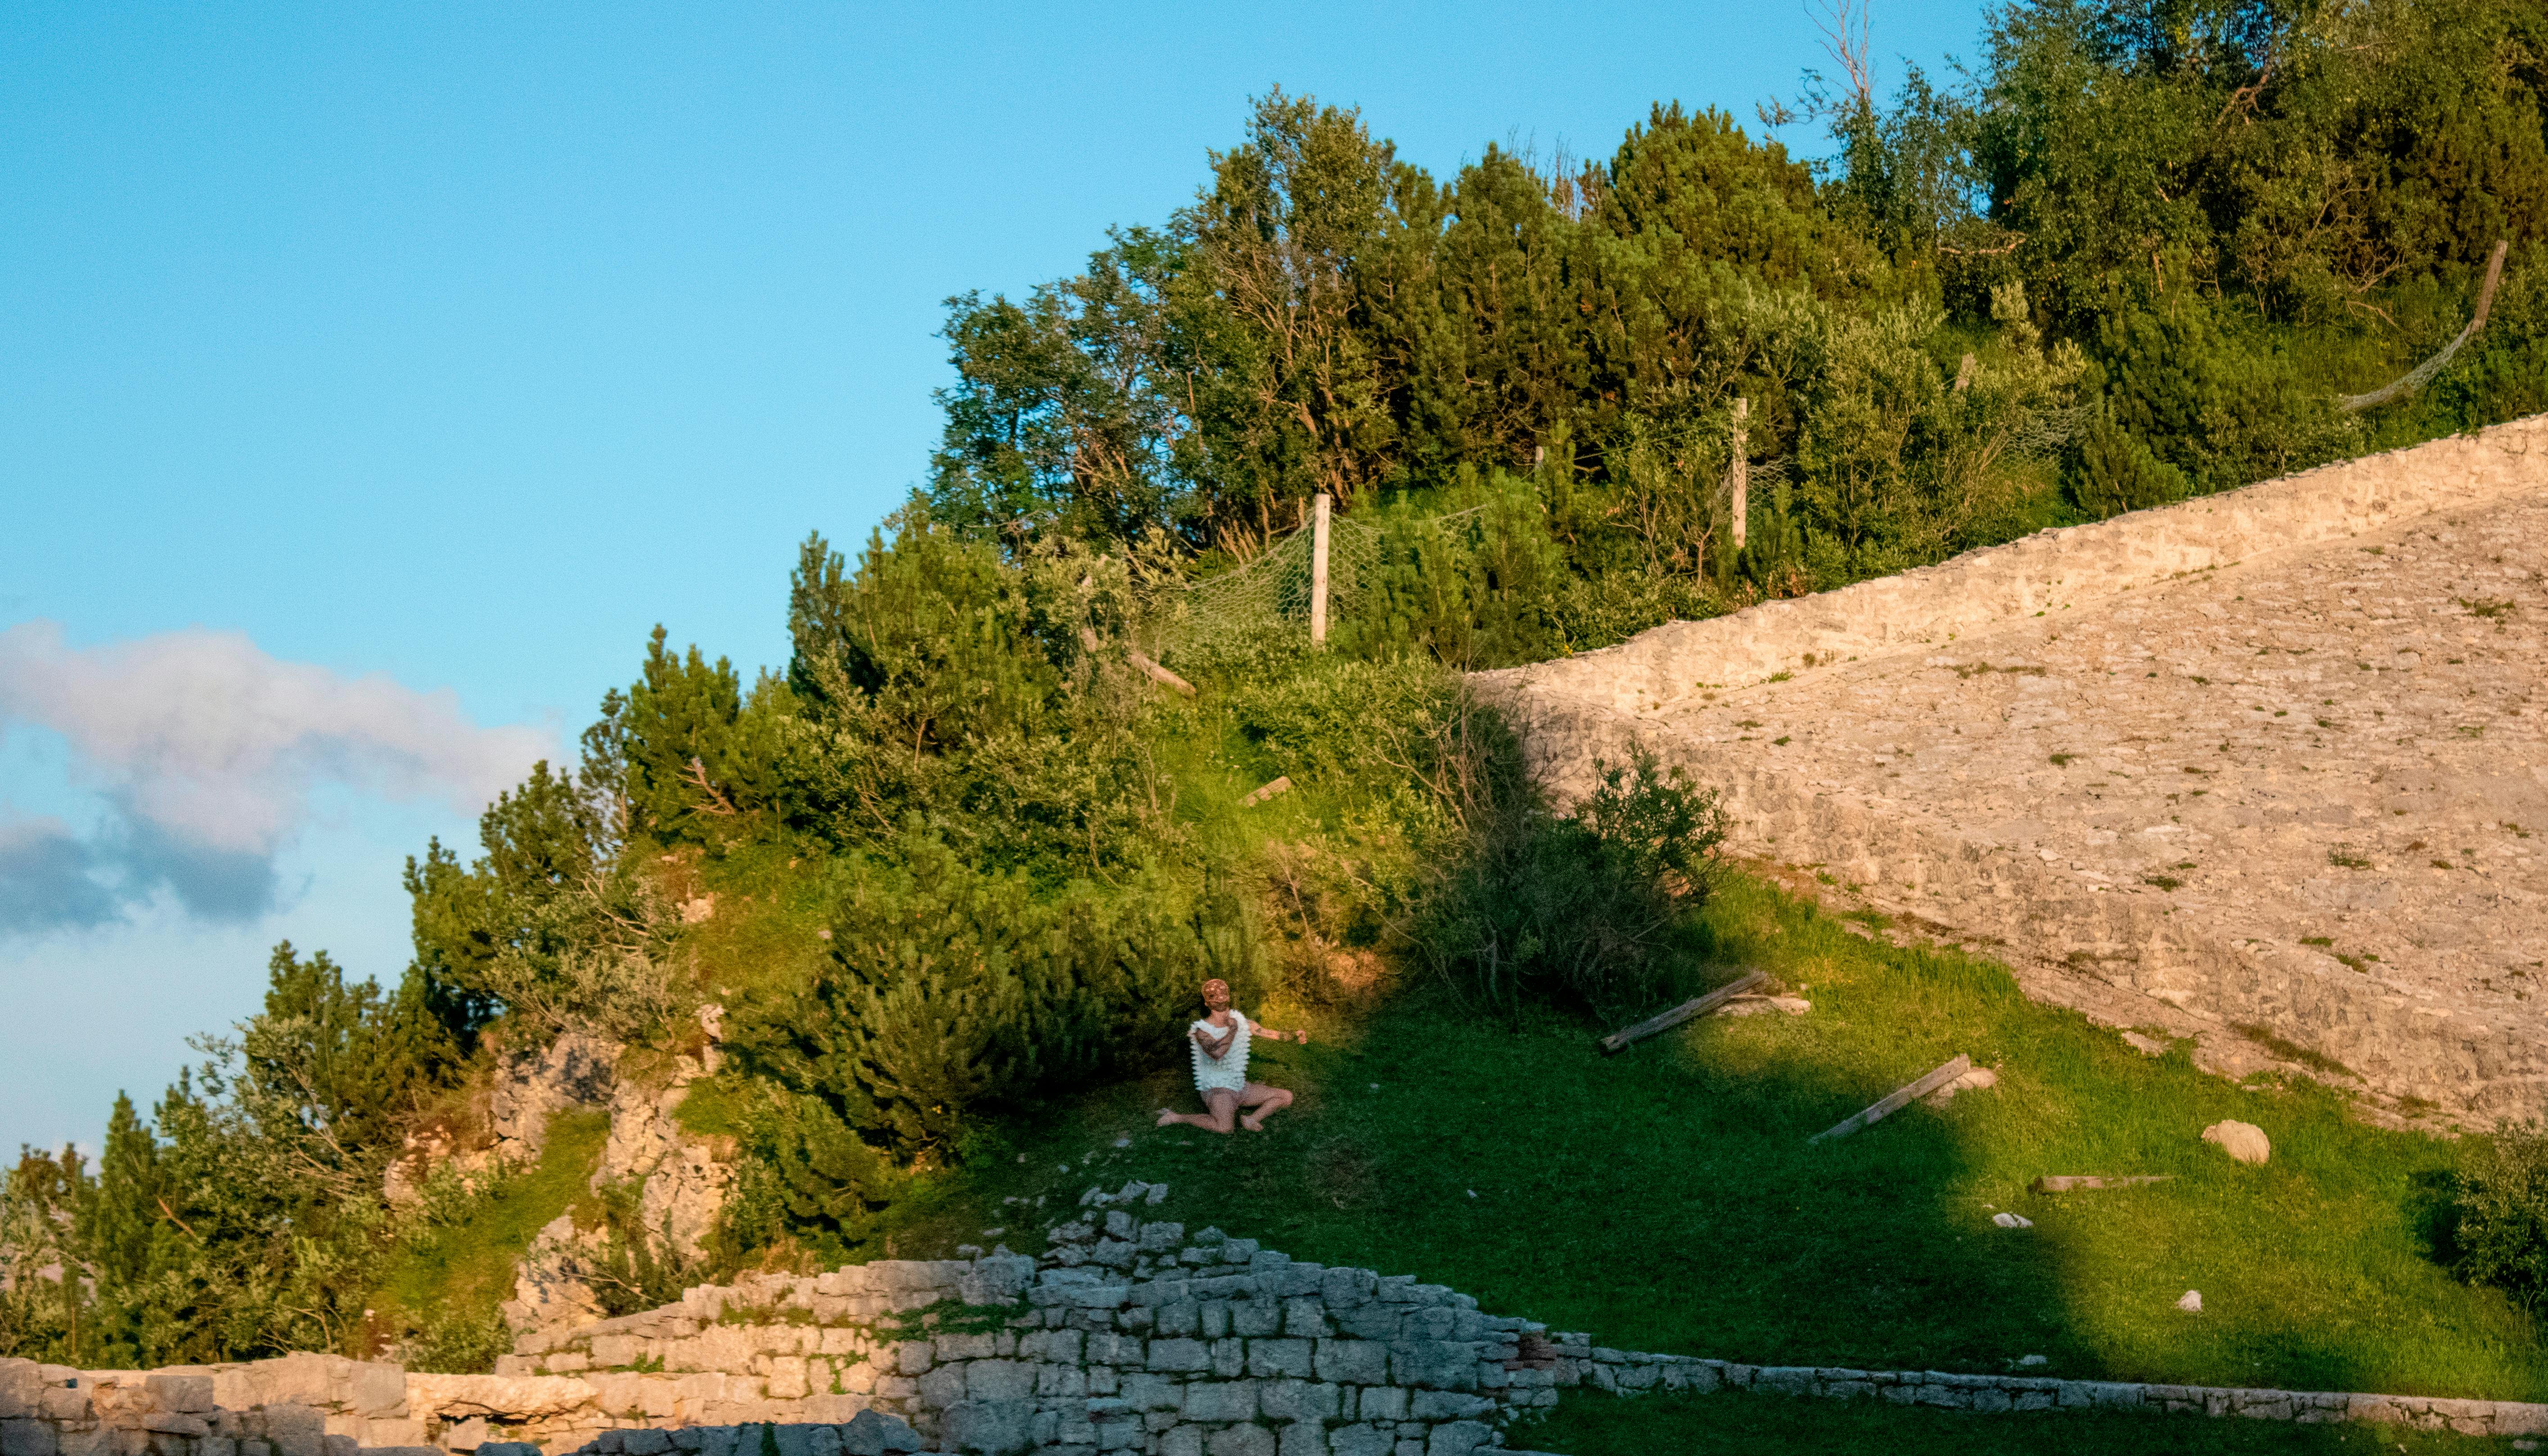 You can see the slope of a hill on a sunny day. Stone ruins are glimpsed. In the landscape, a dancer appears standing out thanks to his white dress.